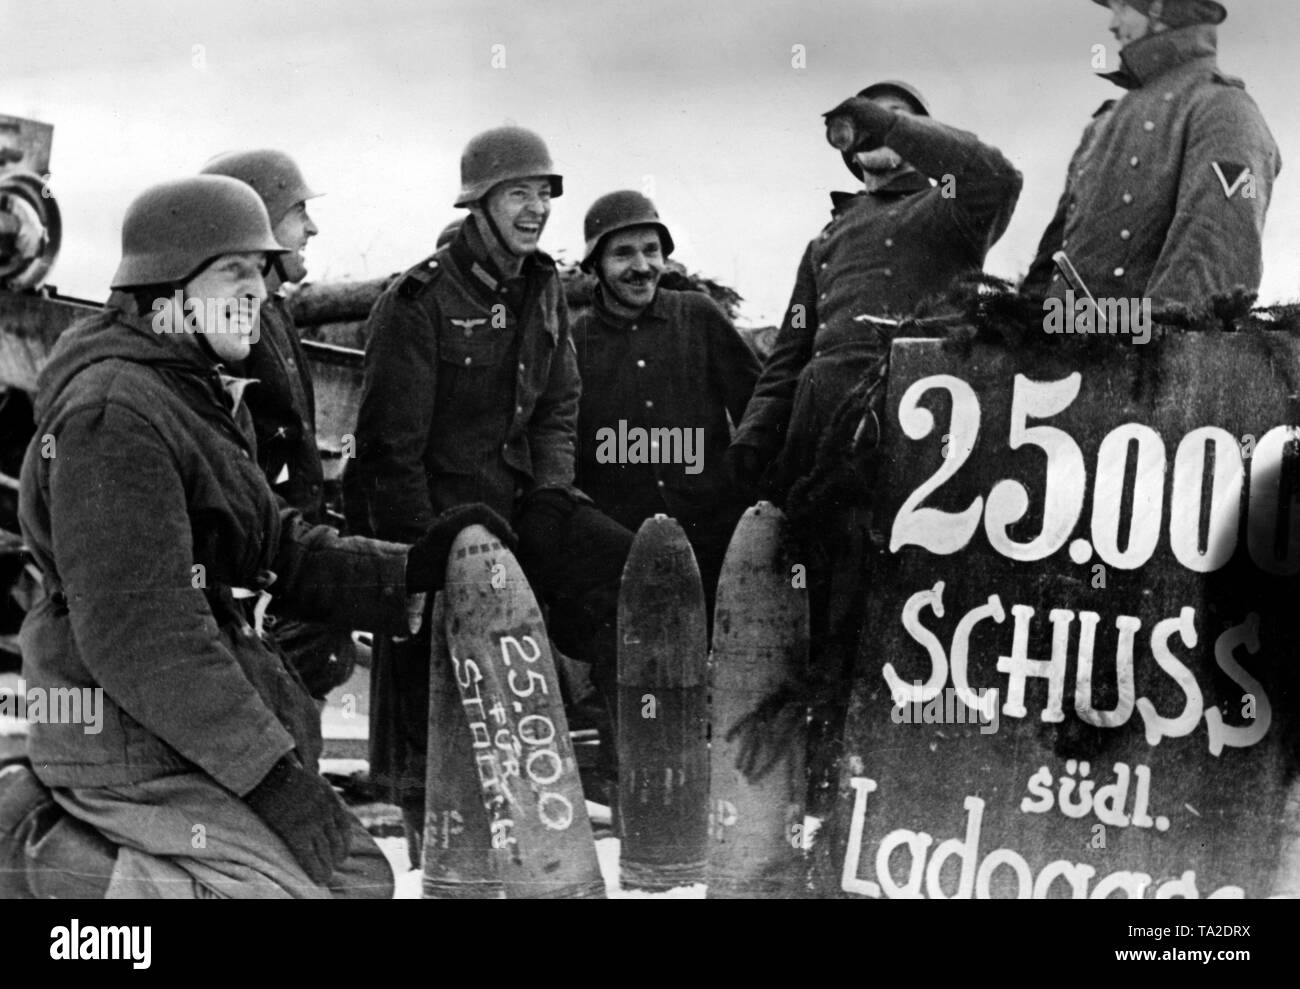 Gunners of an artillery battery celebrate their 25,000 shot. On the grenade next to its number, they have written a salute to Stalin. Photo of the Propaganda Company (PK): war correspondent Schuerer. Stock Photo